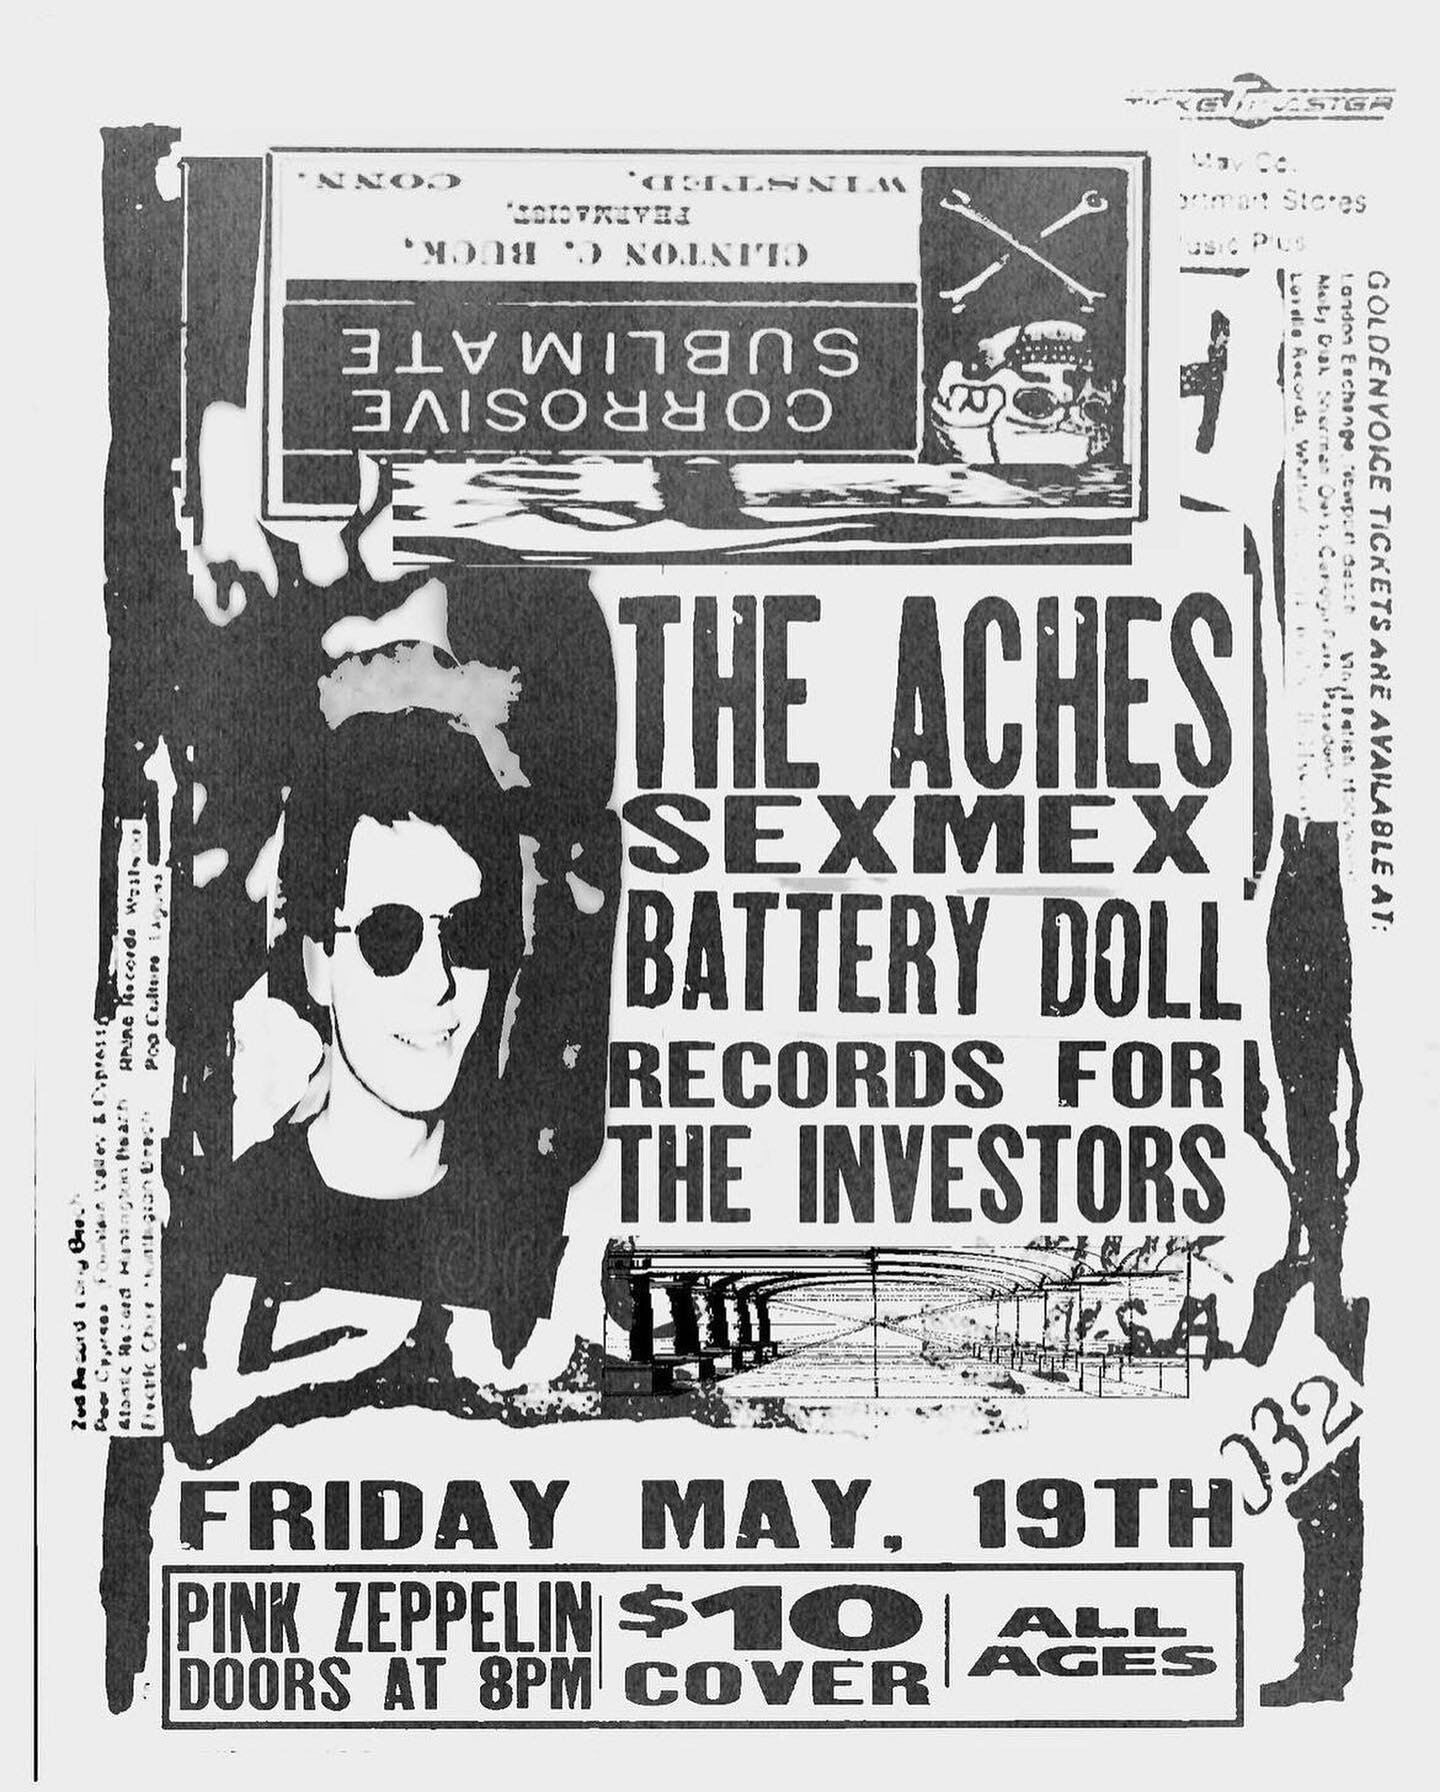 IN JUST A FEW DAYS, FRIDAY MAY 19TH! @theachesband AND @thebatterydoll WILL BE PERFORMING WITH @sexmexsux AND @records_for_the_investors IN SAN ANTONIO! ROAD TRIP! 

THEY WILL BE PERFORMING AT @pinkzeppelinbr ON FRIDAY MAY 19TH IF YOU DIDNT SEE THE F